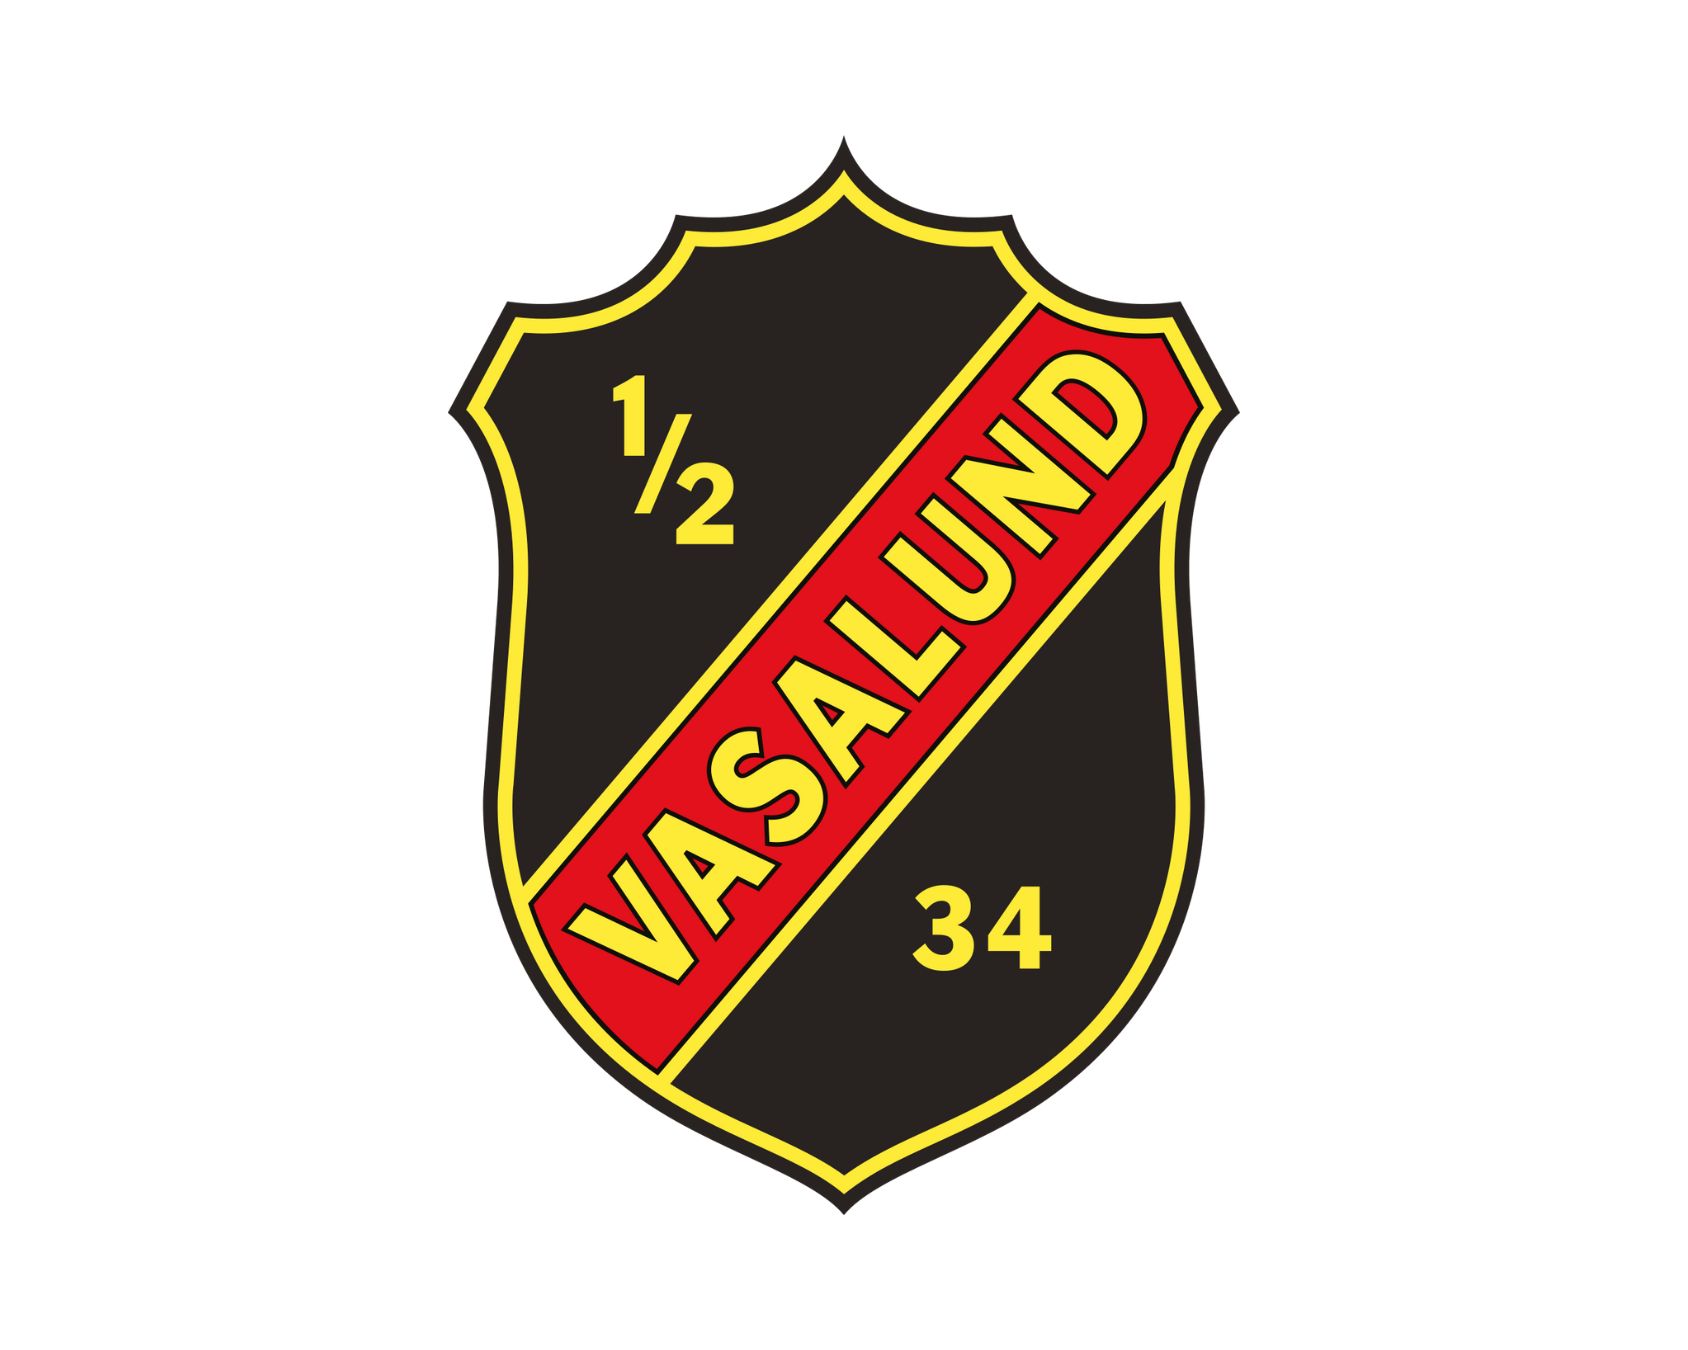 vasalunds-if-14-football-club-facts